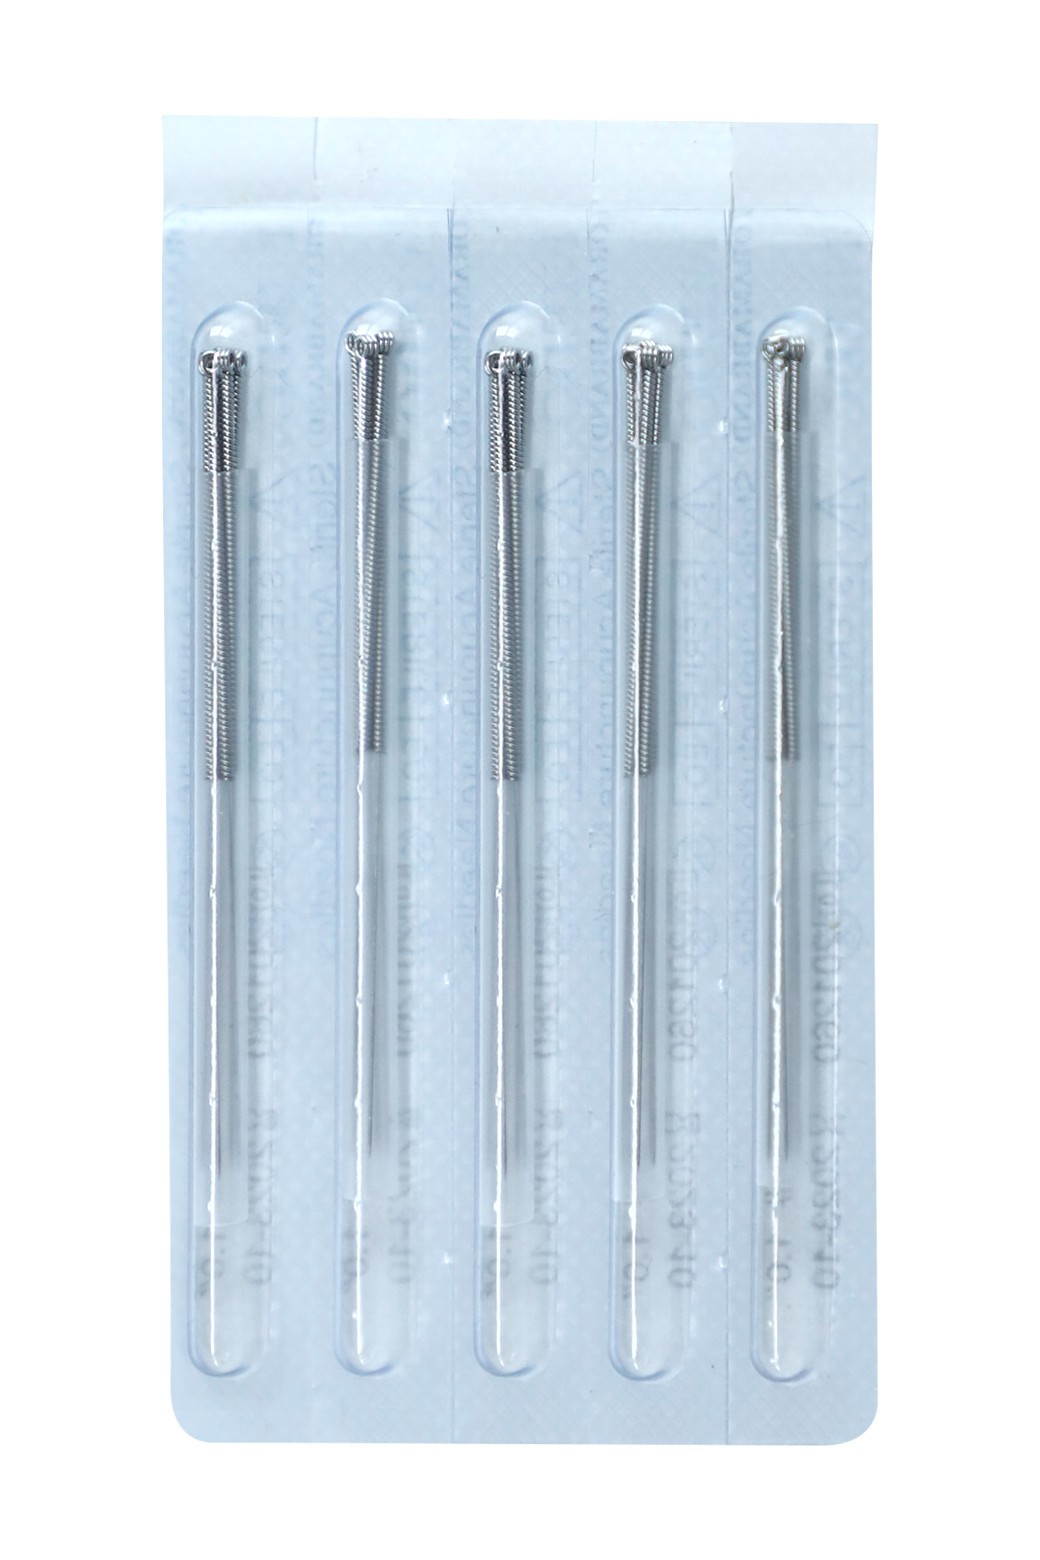 .18x13mm - Alpha Cluster Acupuncture Needle